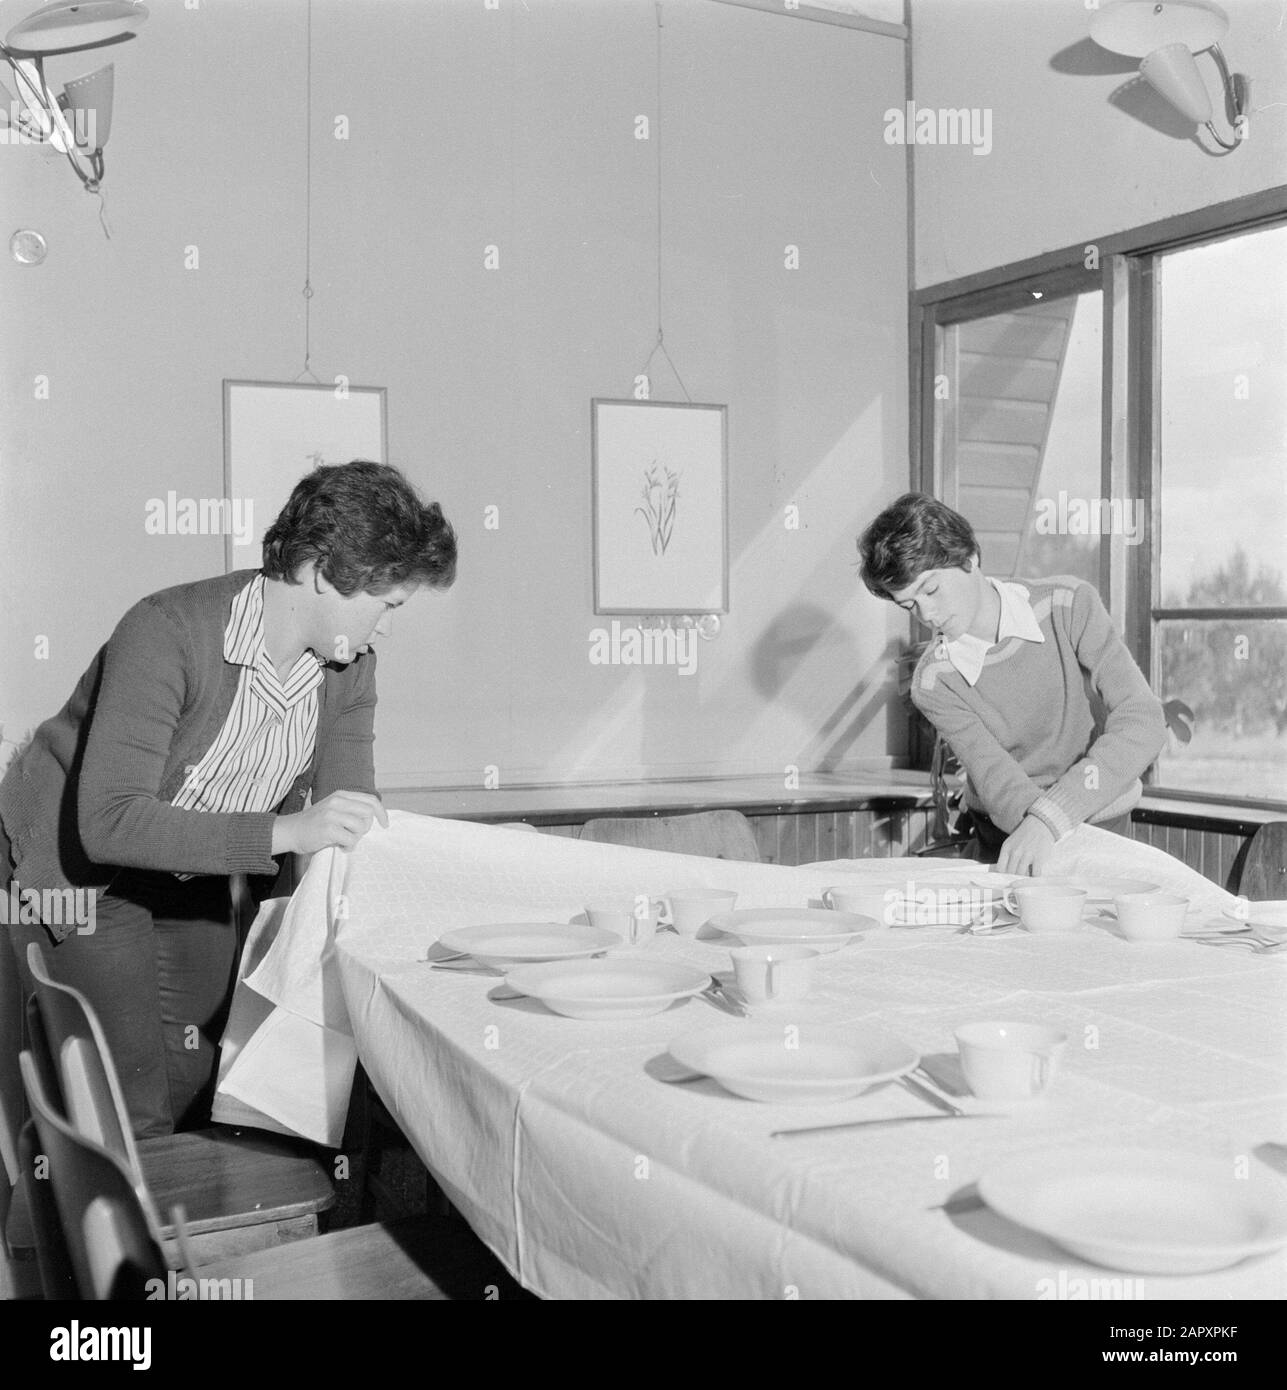 Israel 1964-1965: Gal'ed, since evening  Two people lay the finishing touches on decking tables for the celebration of Seideravond (sedermeal) Annotation: Gal'ed (also called Even Yitzhak) is a kibbutz in northern Israel, located in the plain of Manasseh. In 2006 it had a population of 405. Seder Evening (also called Seideravond) is an evening at the beginning of the Passover festival, where Jews from the Haggada read (booklet about the story of Jewish slavery in Egypt and the exodus from Egypt), drink 4 glasses of wine (or grape juice) and a festive sedermeal. Seder literally means order or o Stock Photo